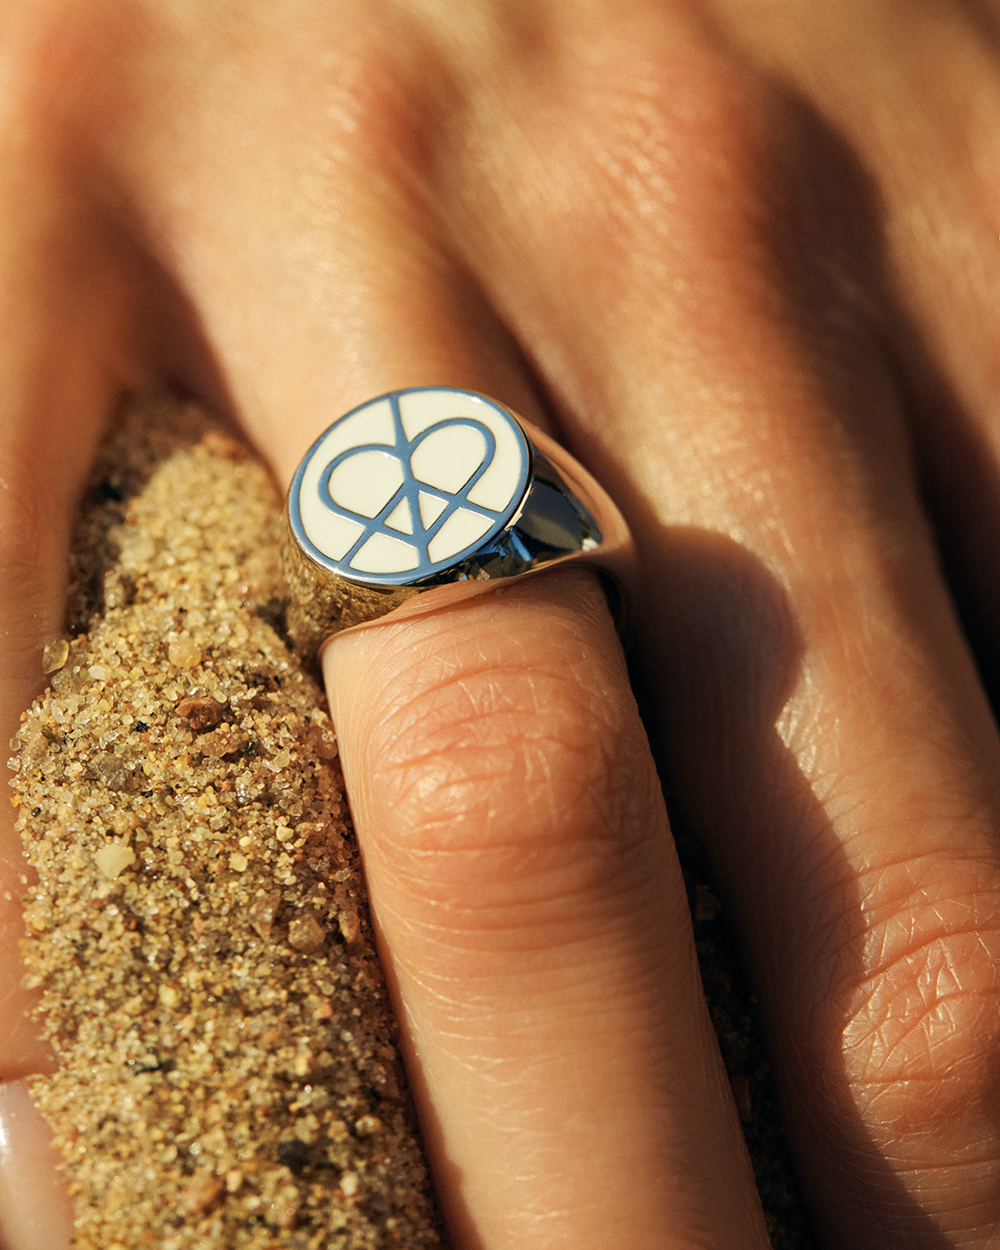 PEACE & LOVE SIGNET RING WITH WHITE ENAMEL  